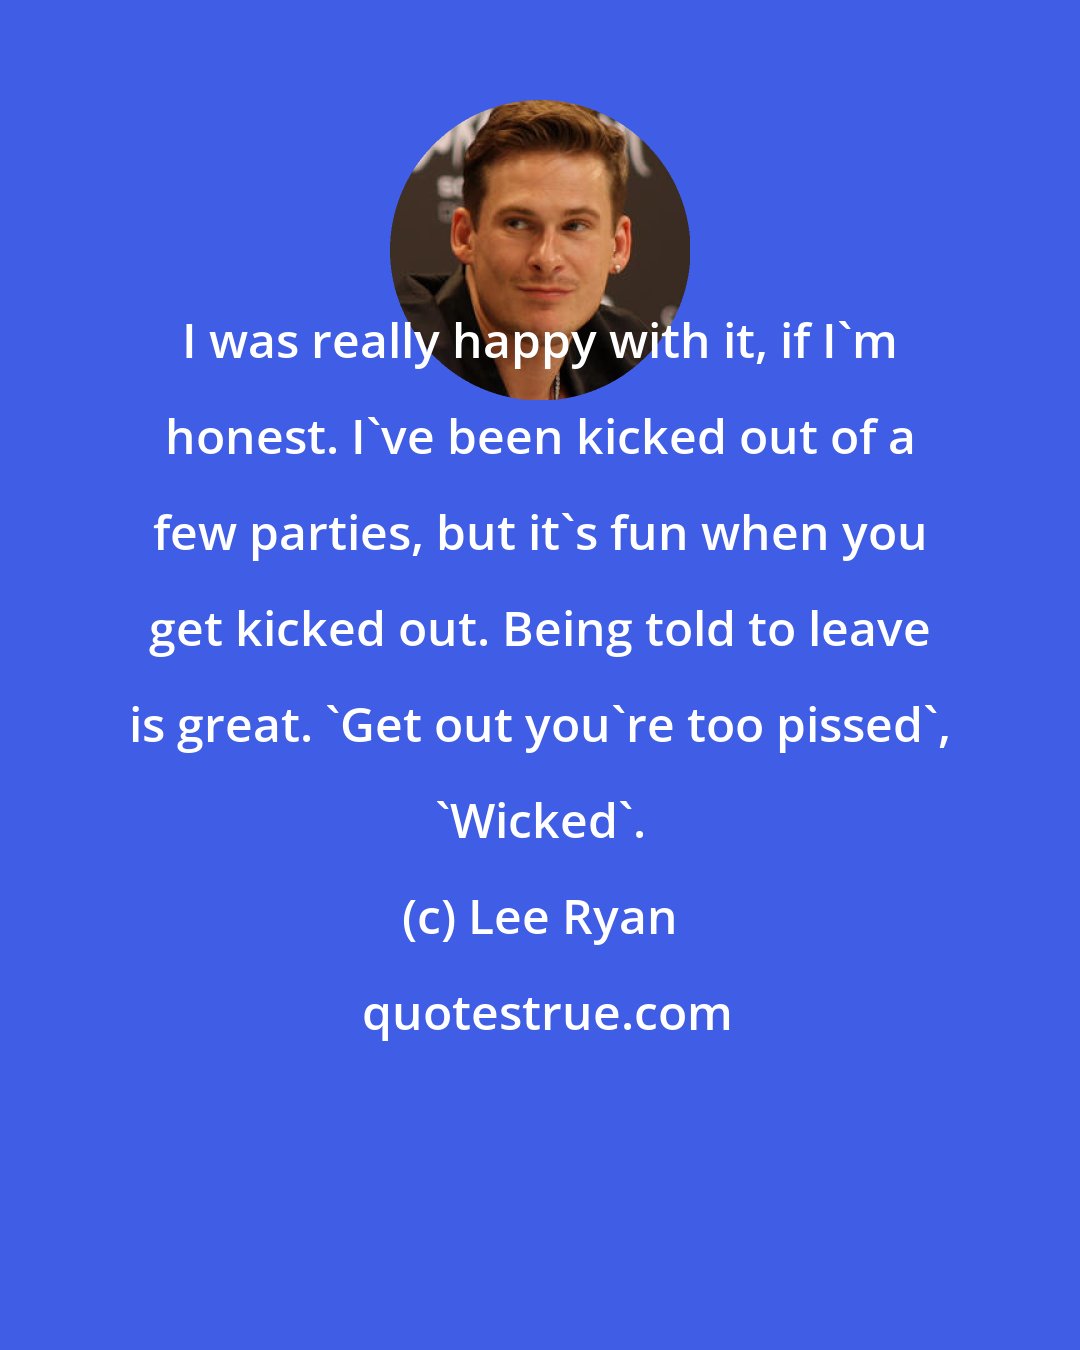 Lee Ryan: I was really happy with it, if I'm honest. I've been kicked out of a few parties, but it's fun when you get kicked out. Being told to leave is great. 'Get out you're too pissed', 'Wicked'.